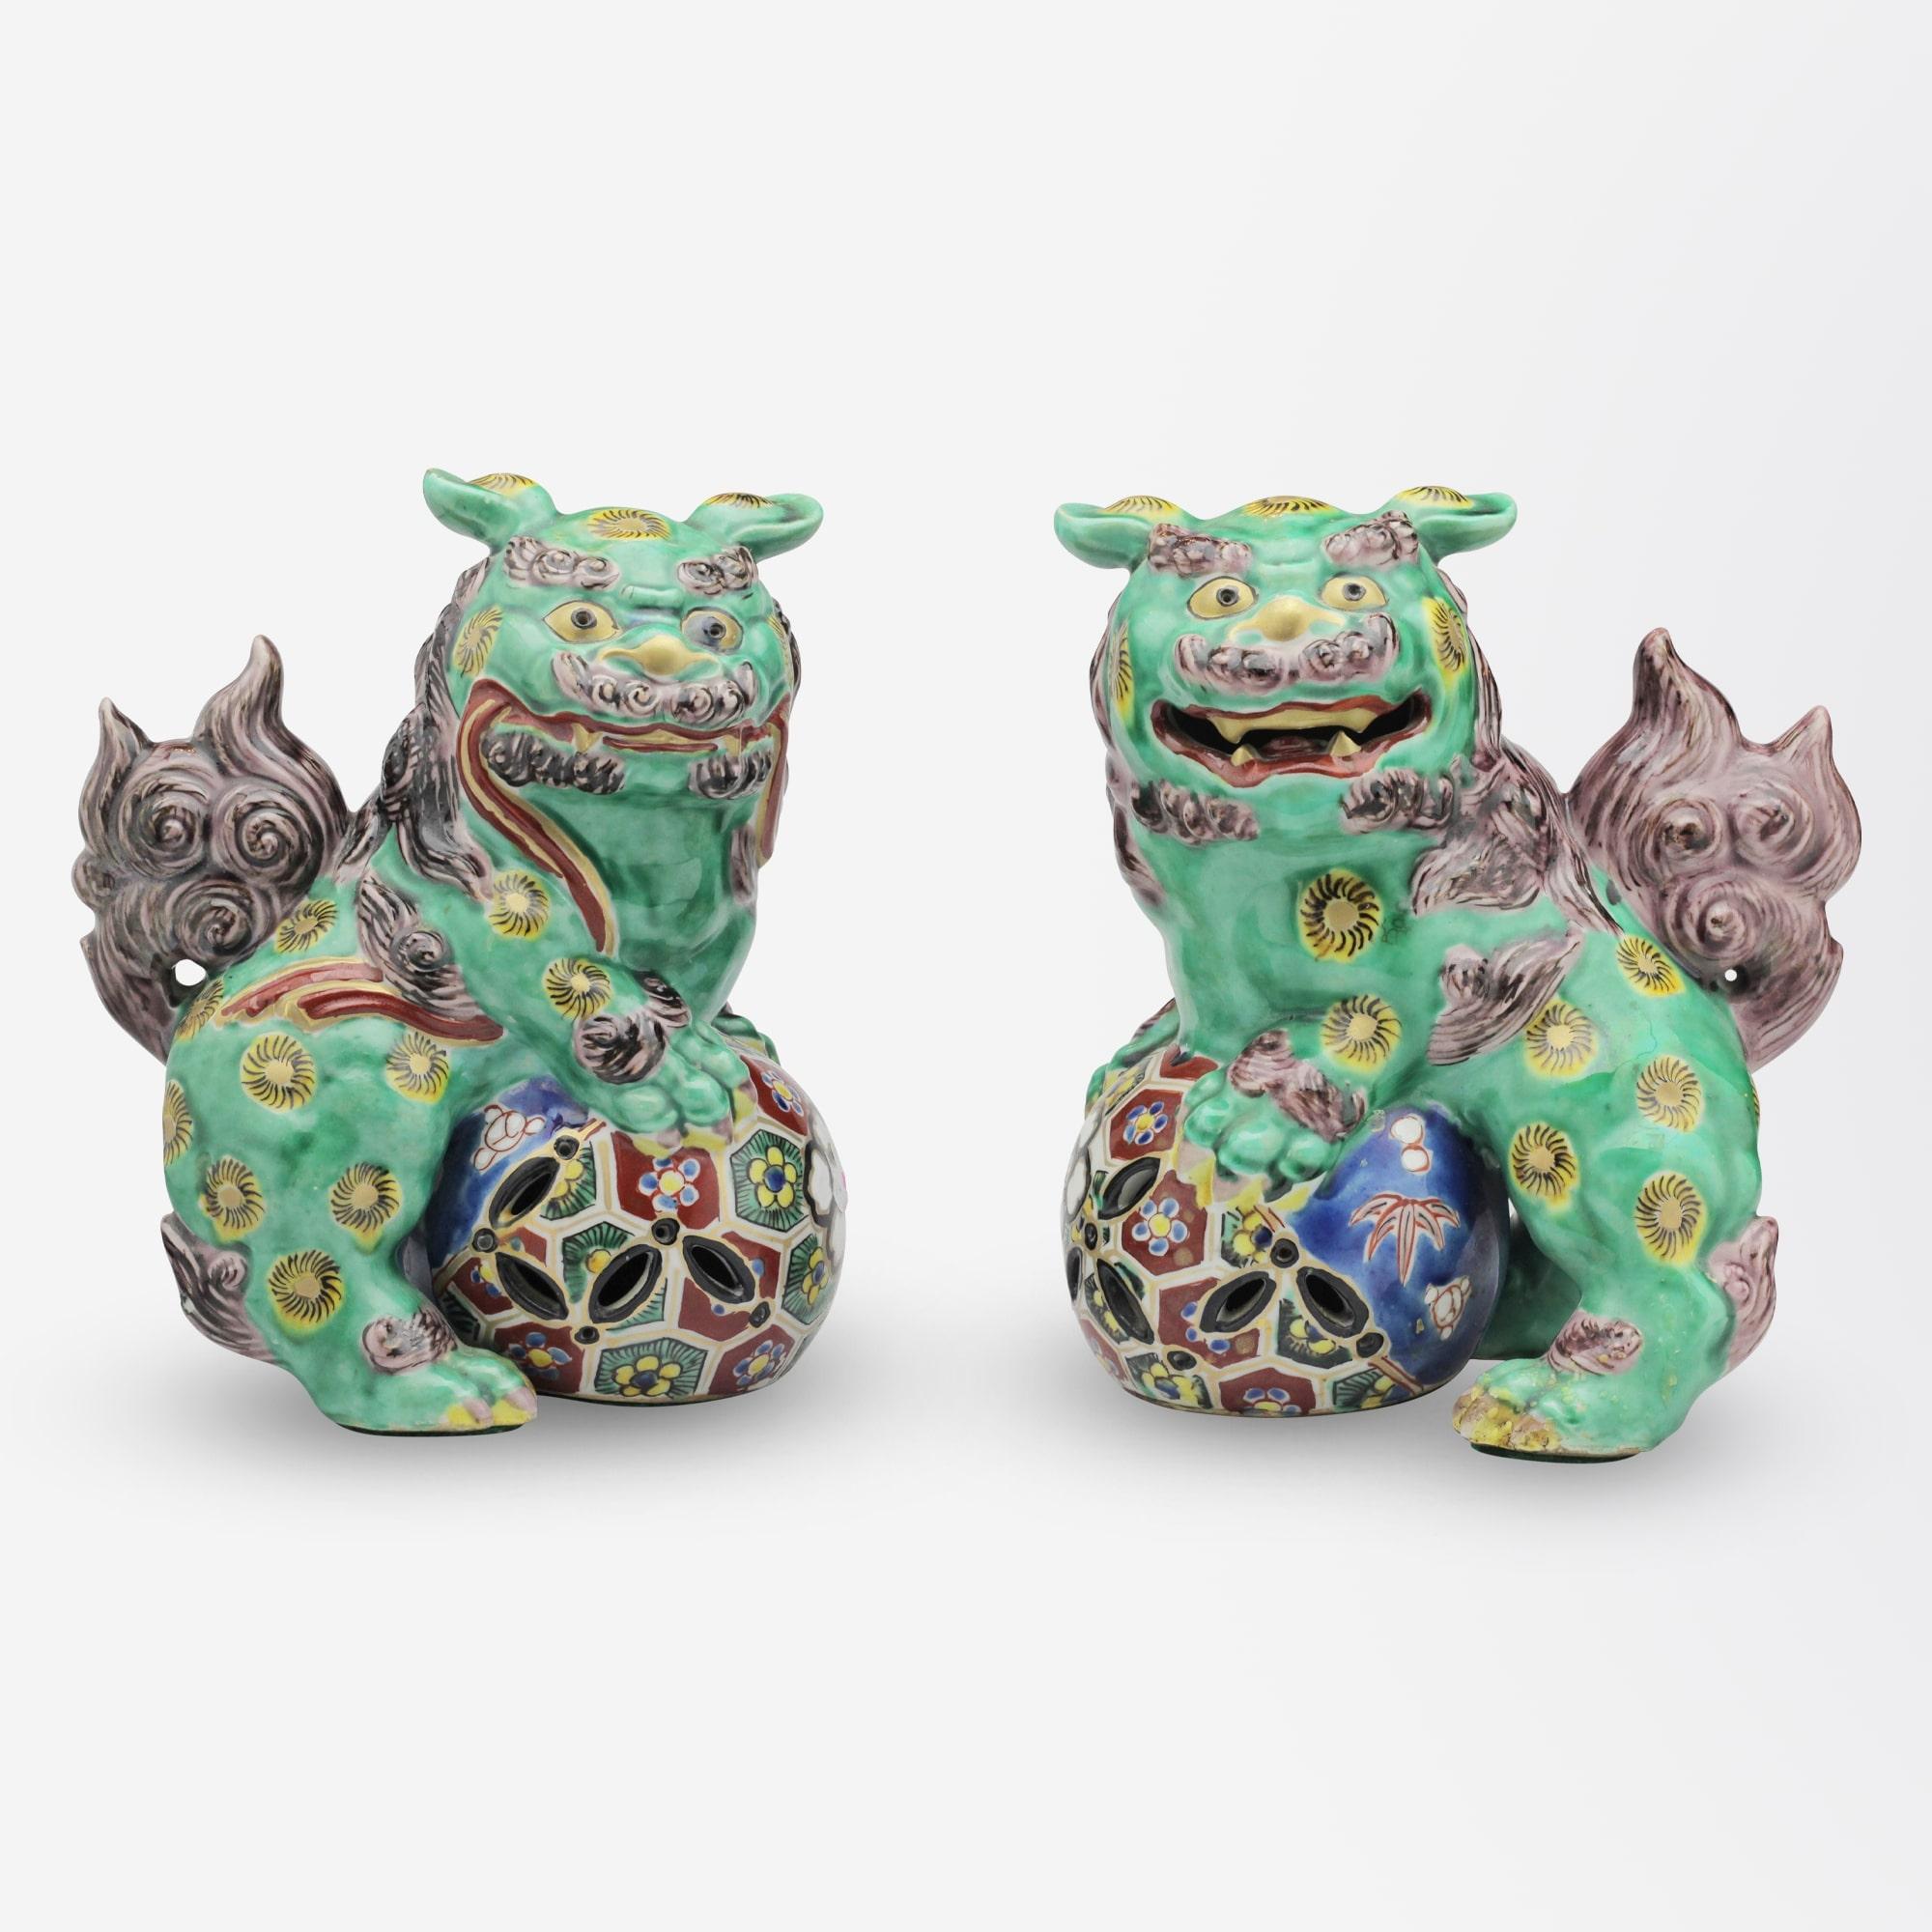 A pair of fine quality Japanese Kutani foo dogs in rich polychrome enamels over porcelain. The pair date to the Meiji period (1868-1912) and are in lovely condition for their age.

Kutani ware is a style of Japanese porcelain traditionally from the